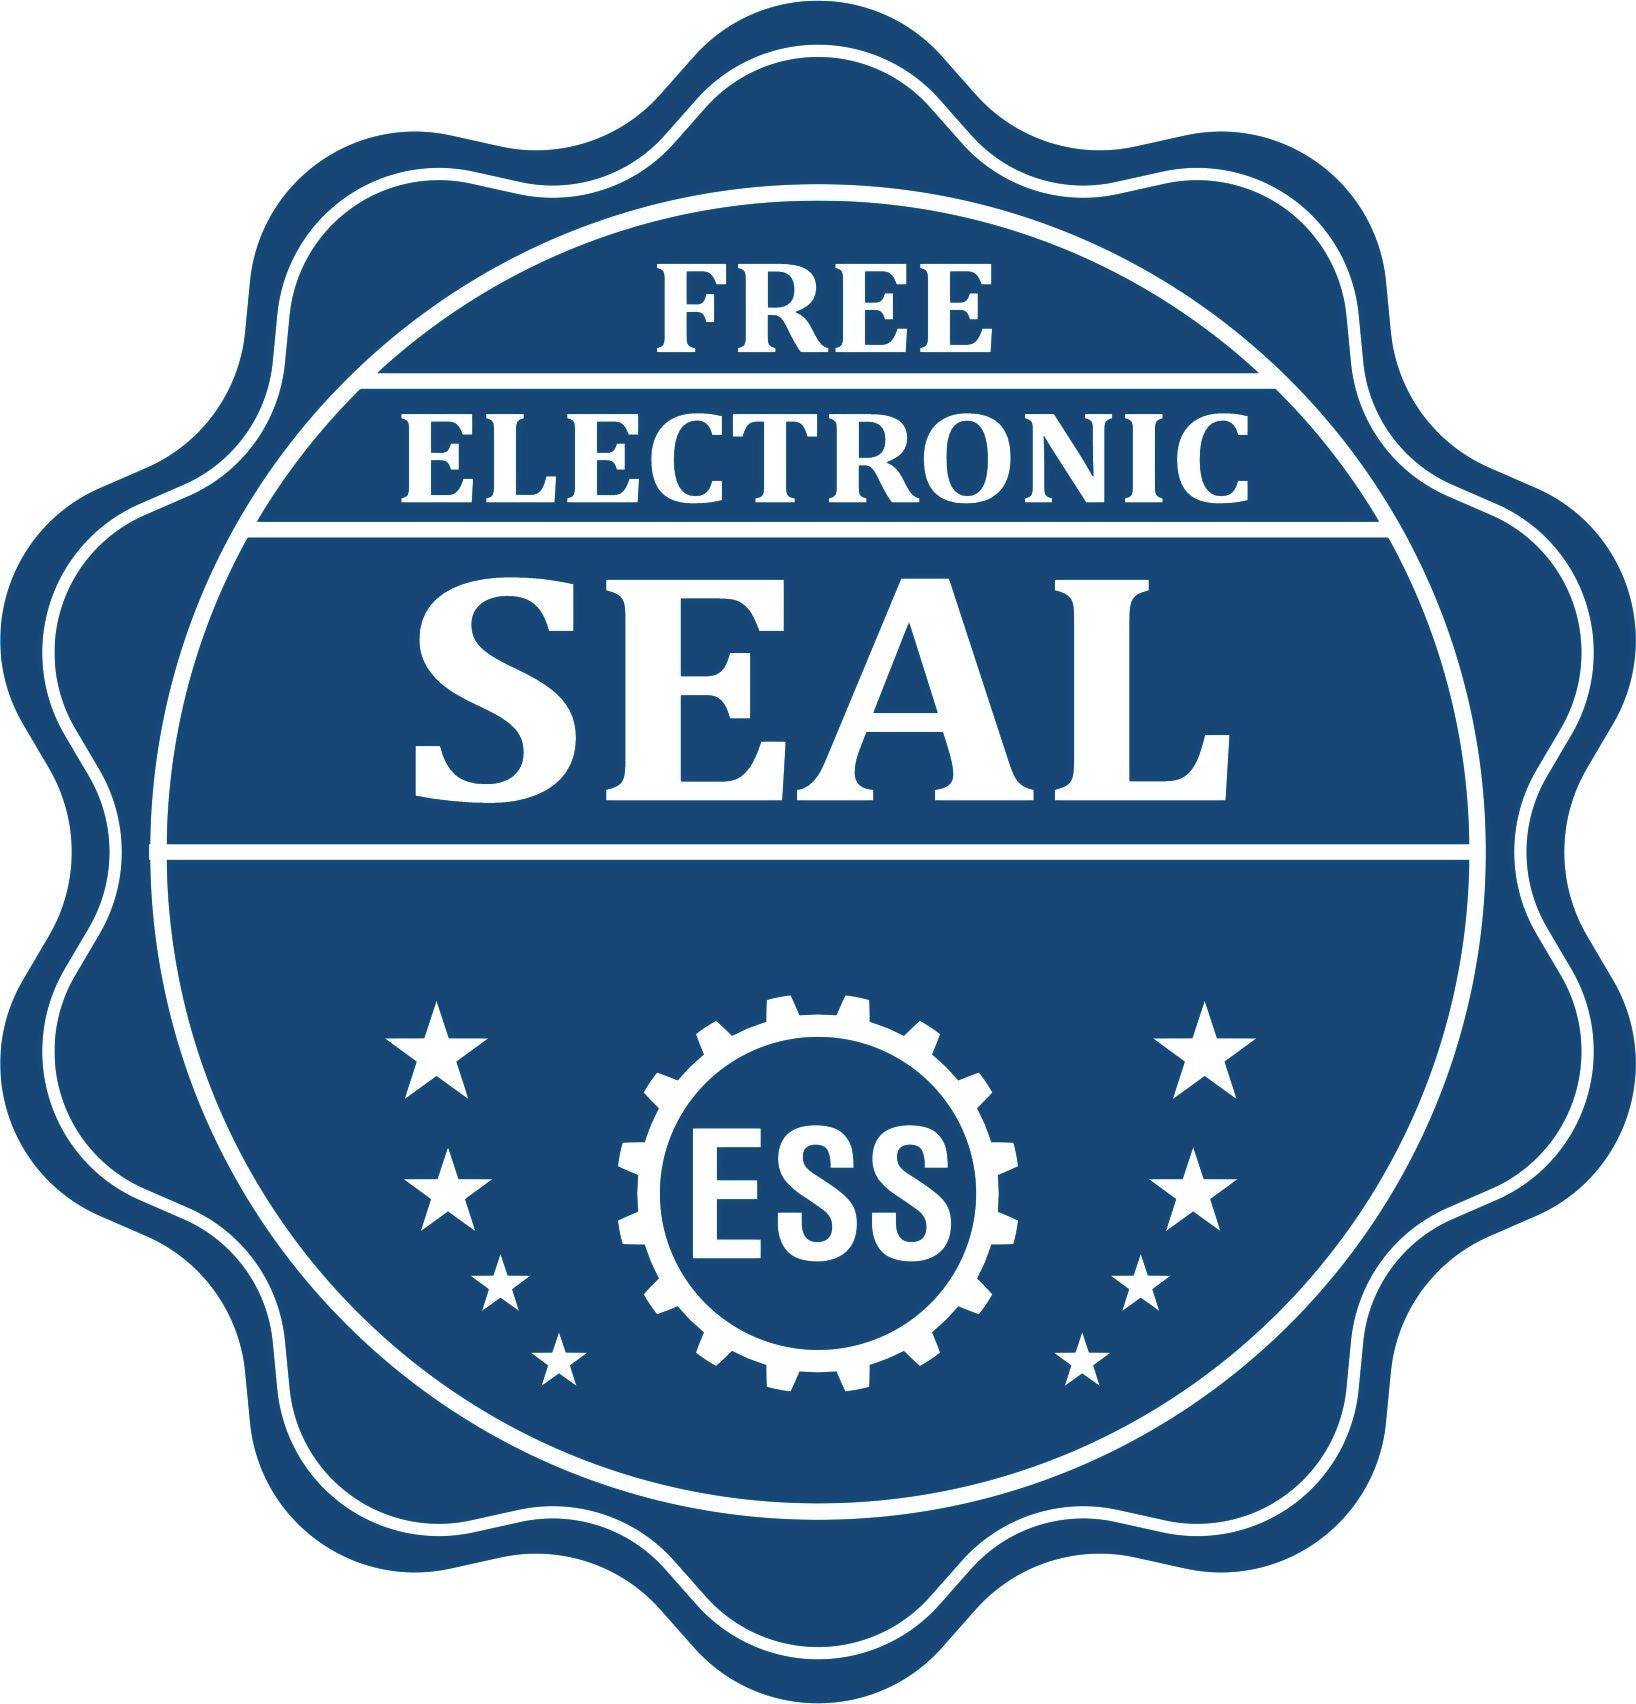 A badge showing a free electronic seal for the State of Wisconsin Extended Long Reach Engineer Seal with stars and the ESS gear on the emblem.